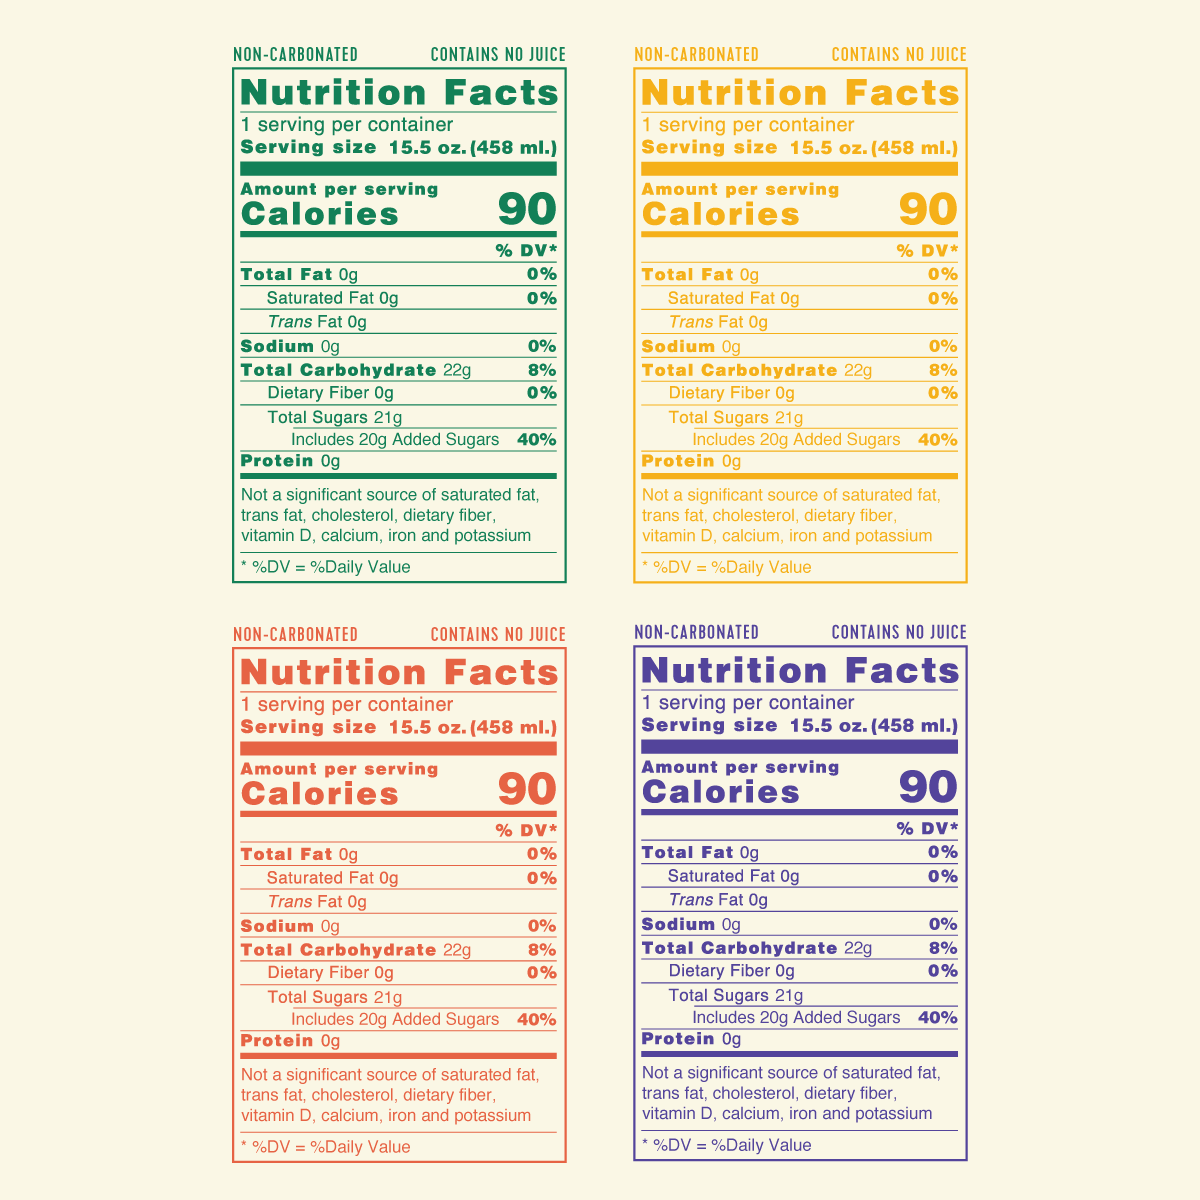 The four nutrition panels of the Non-Carbonated line. 90 Calories and 8% DV Total Carbohydrates.